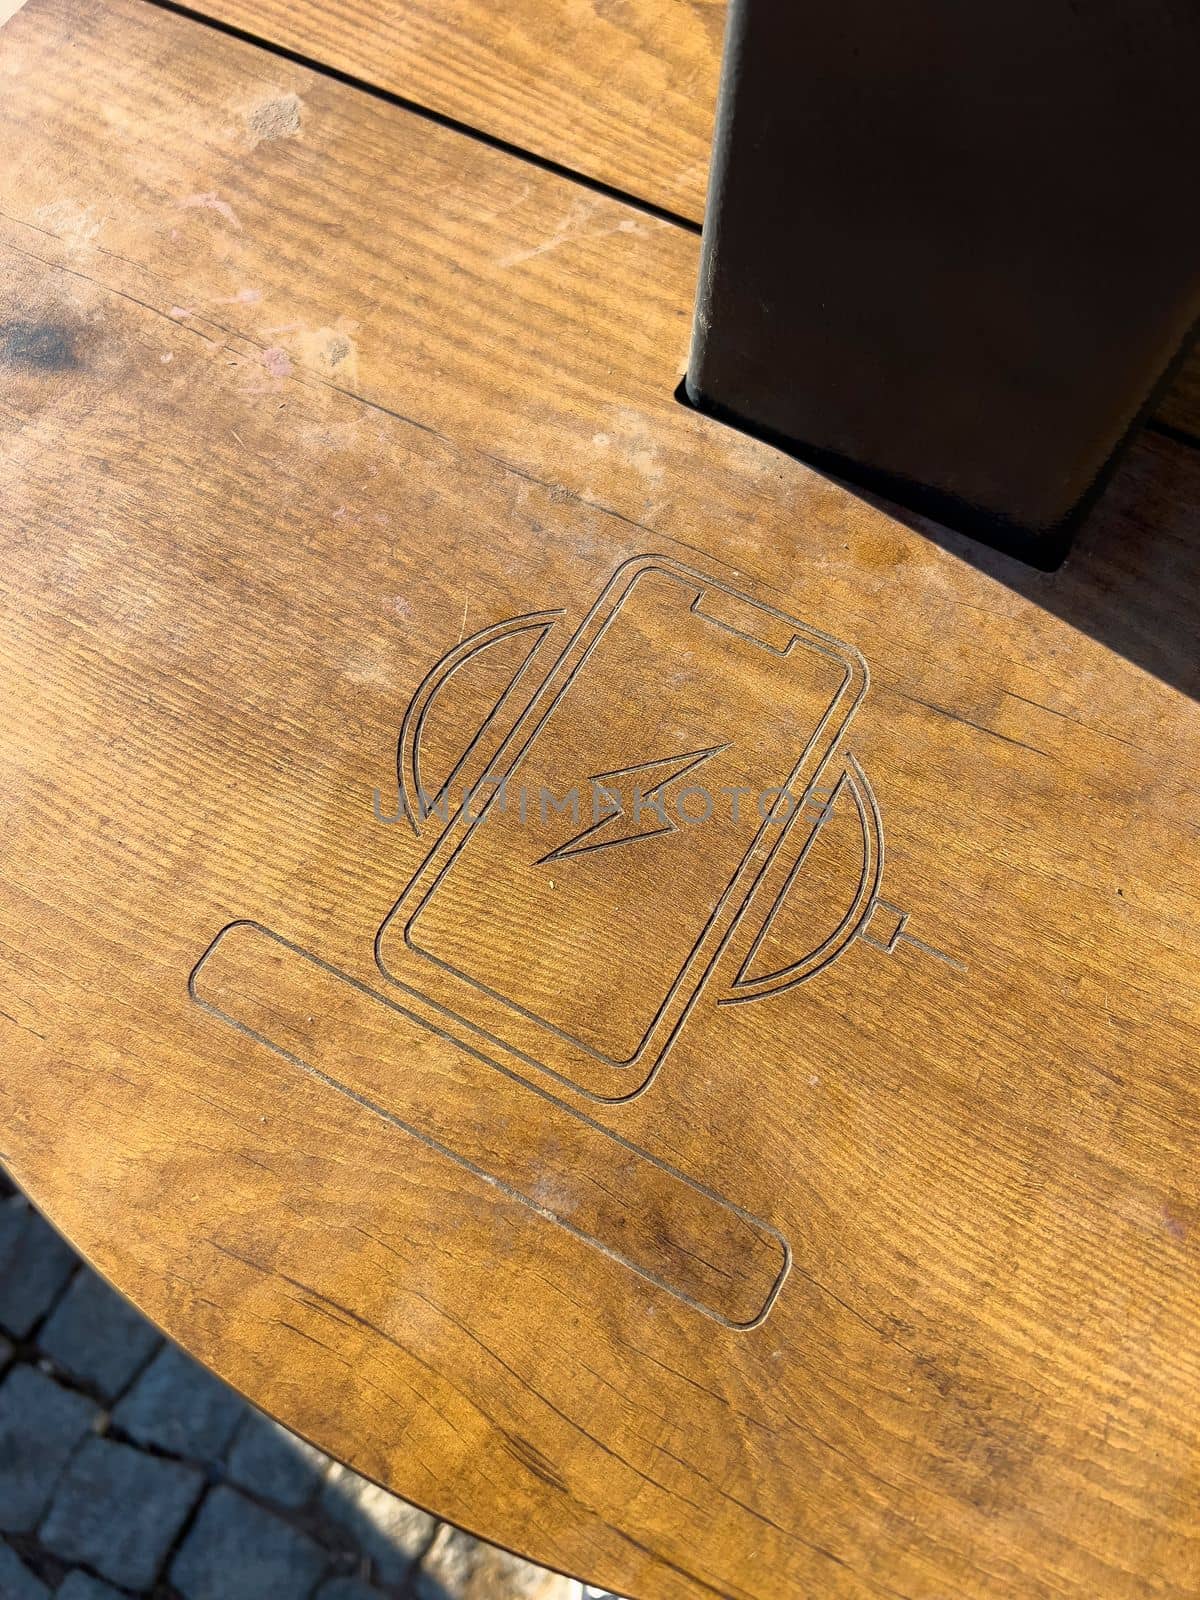 Public wireless smartphone station on wooden table